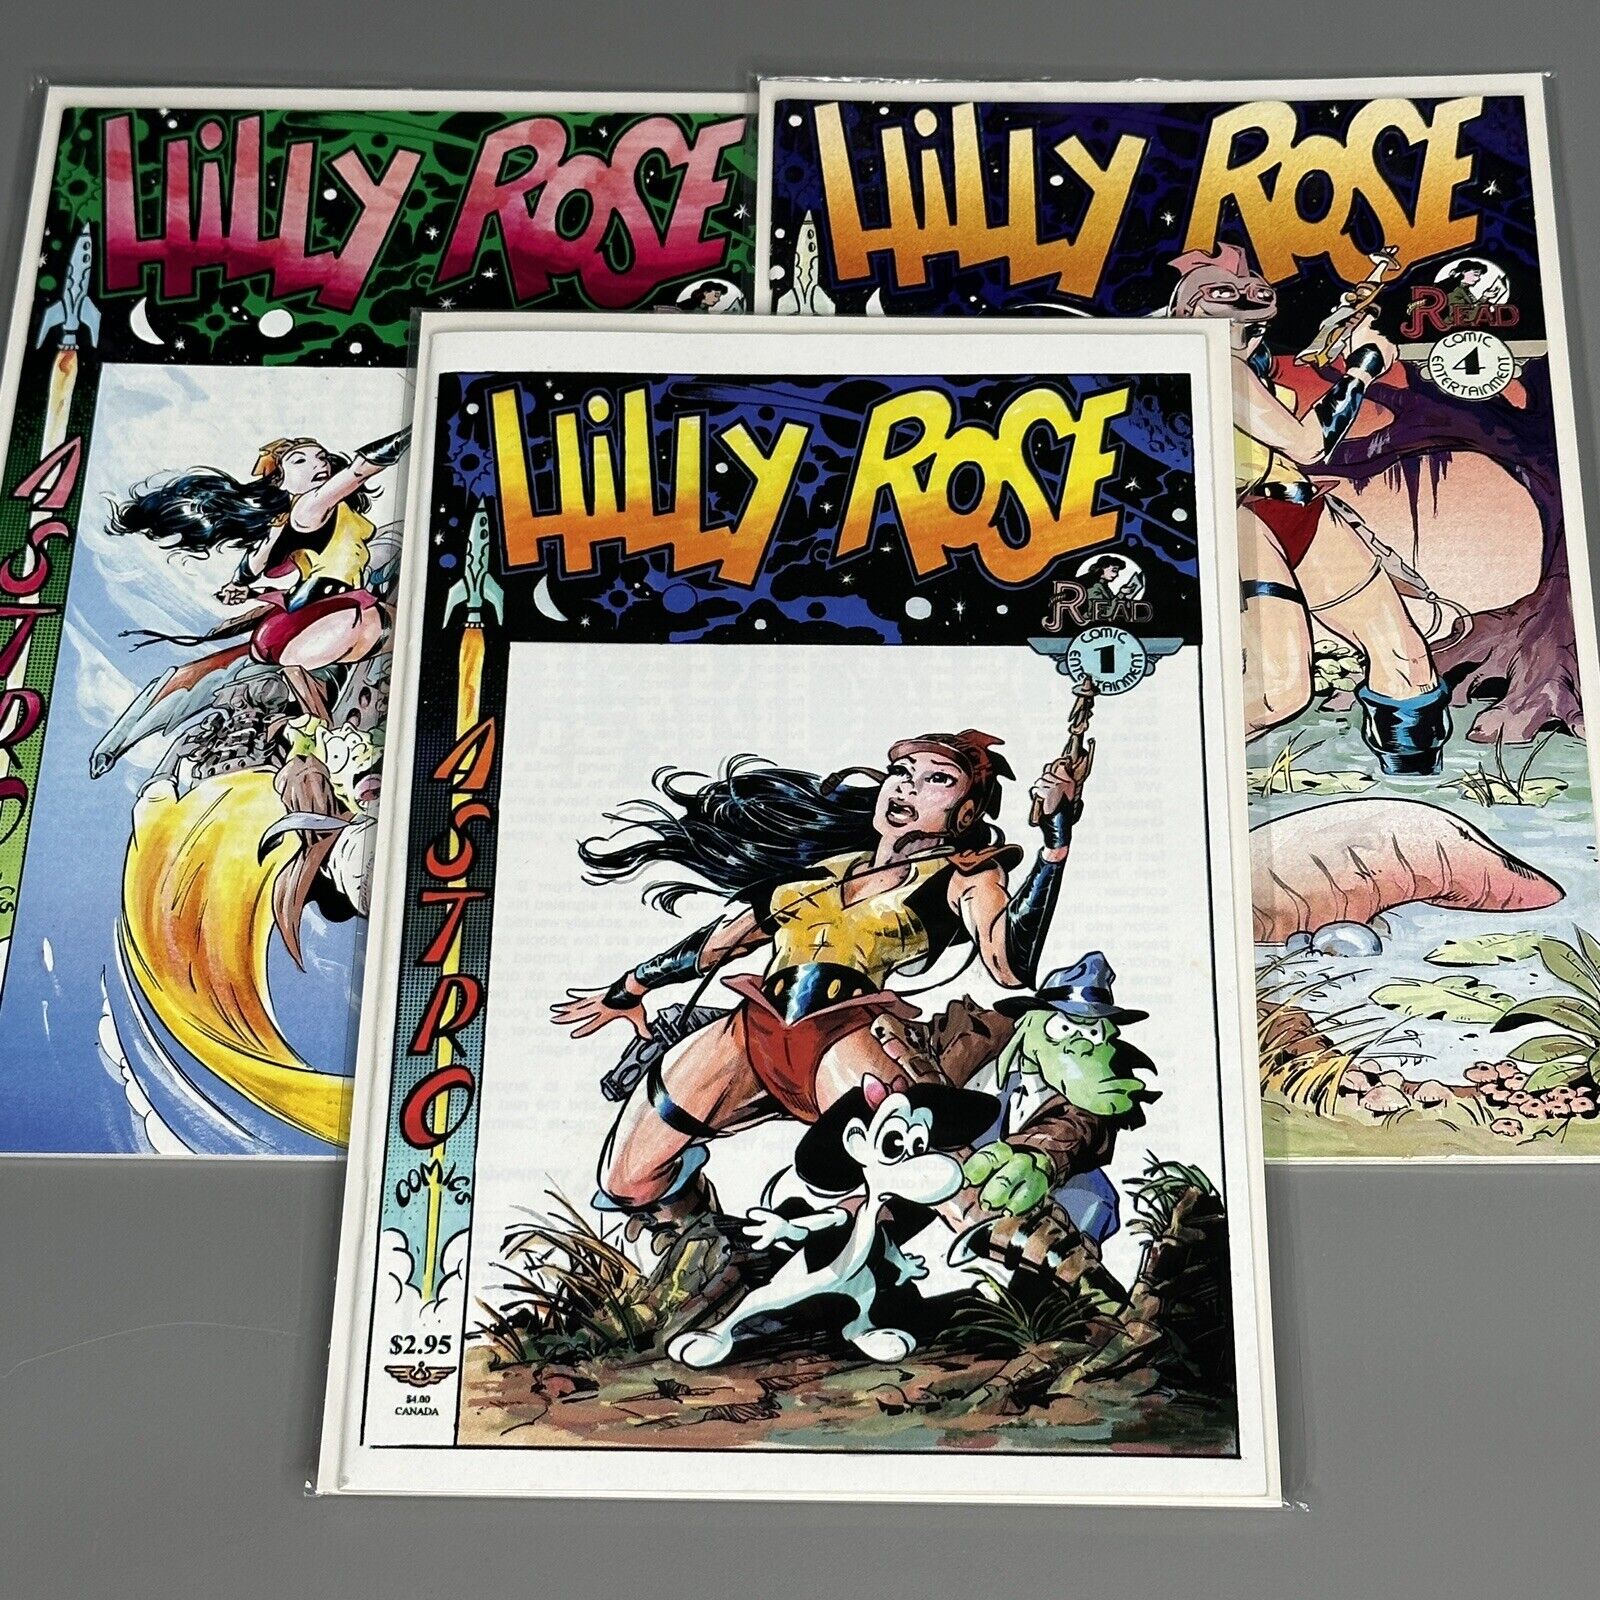 Astro Comics Hilly Rose Space Adventures 1, 2, 4 (1995) VF/NM Bags & Boards